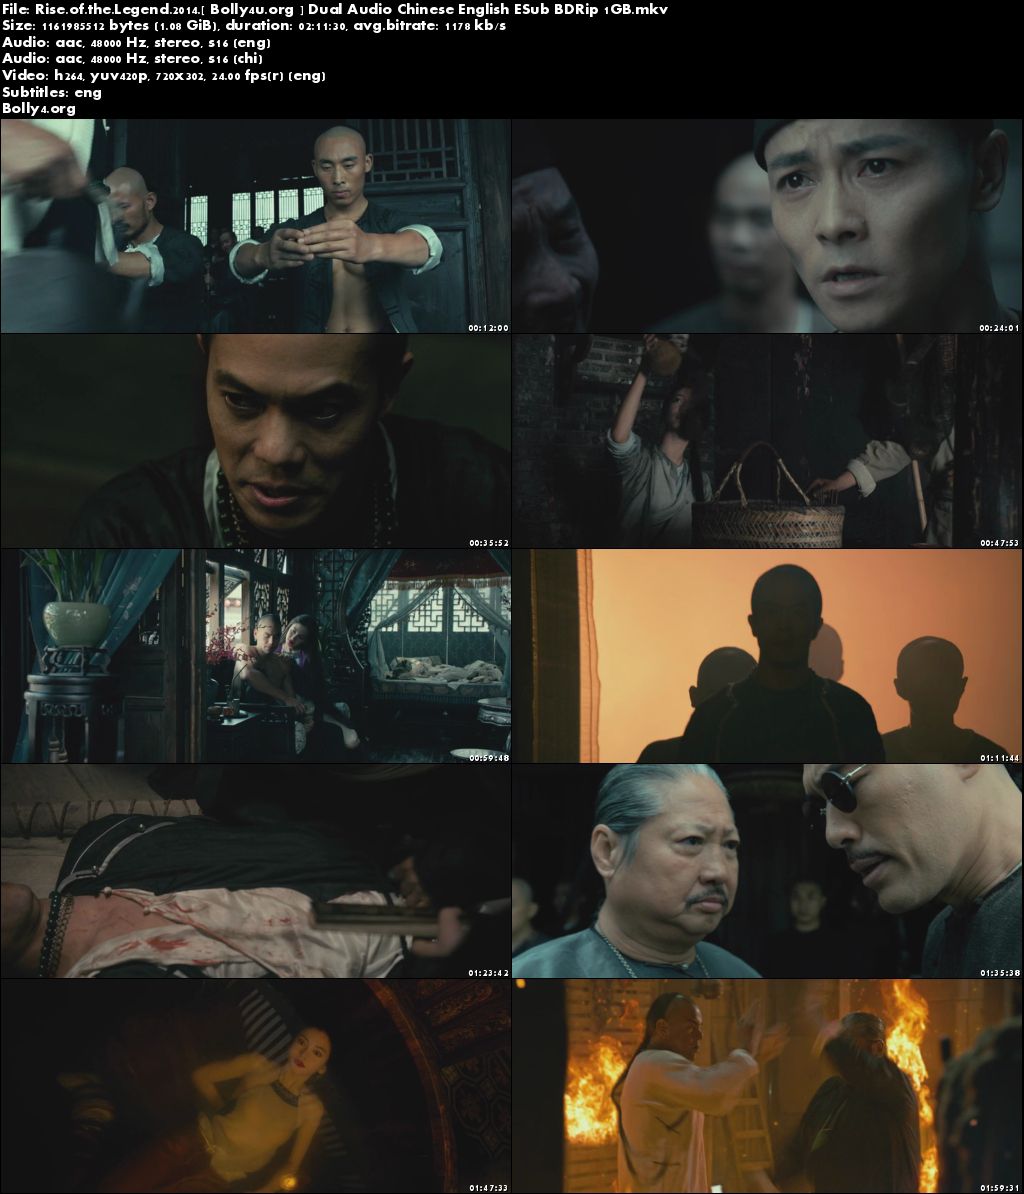 Rise of The Legend 2014 BDRip Chinese English Dual Audio 720p ESub Download